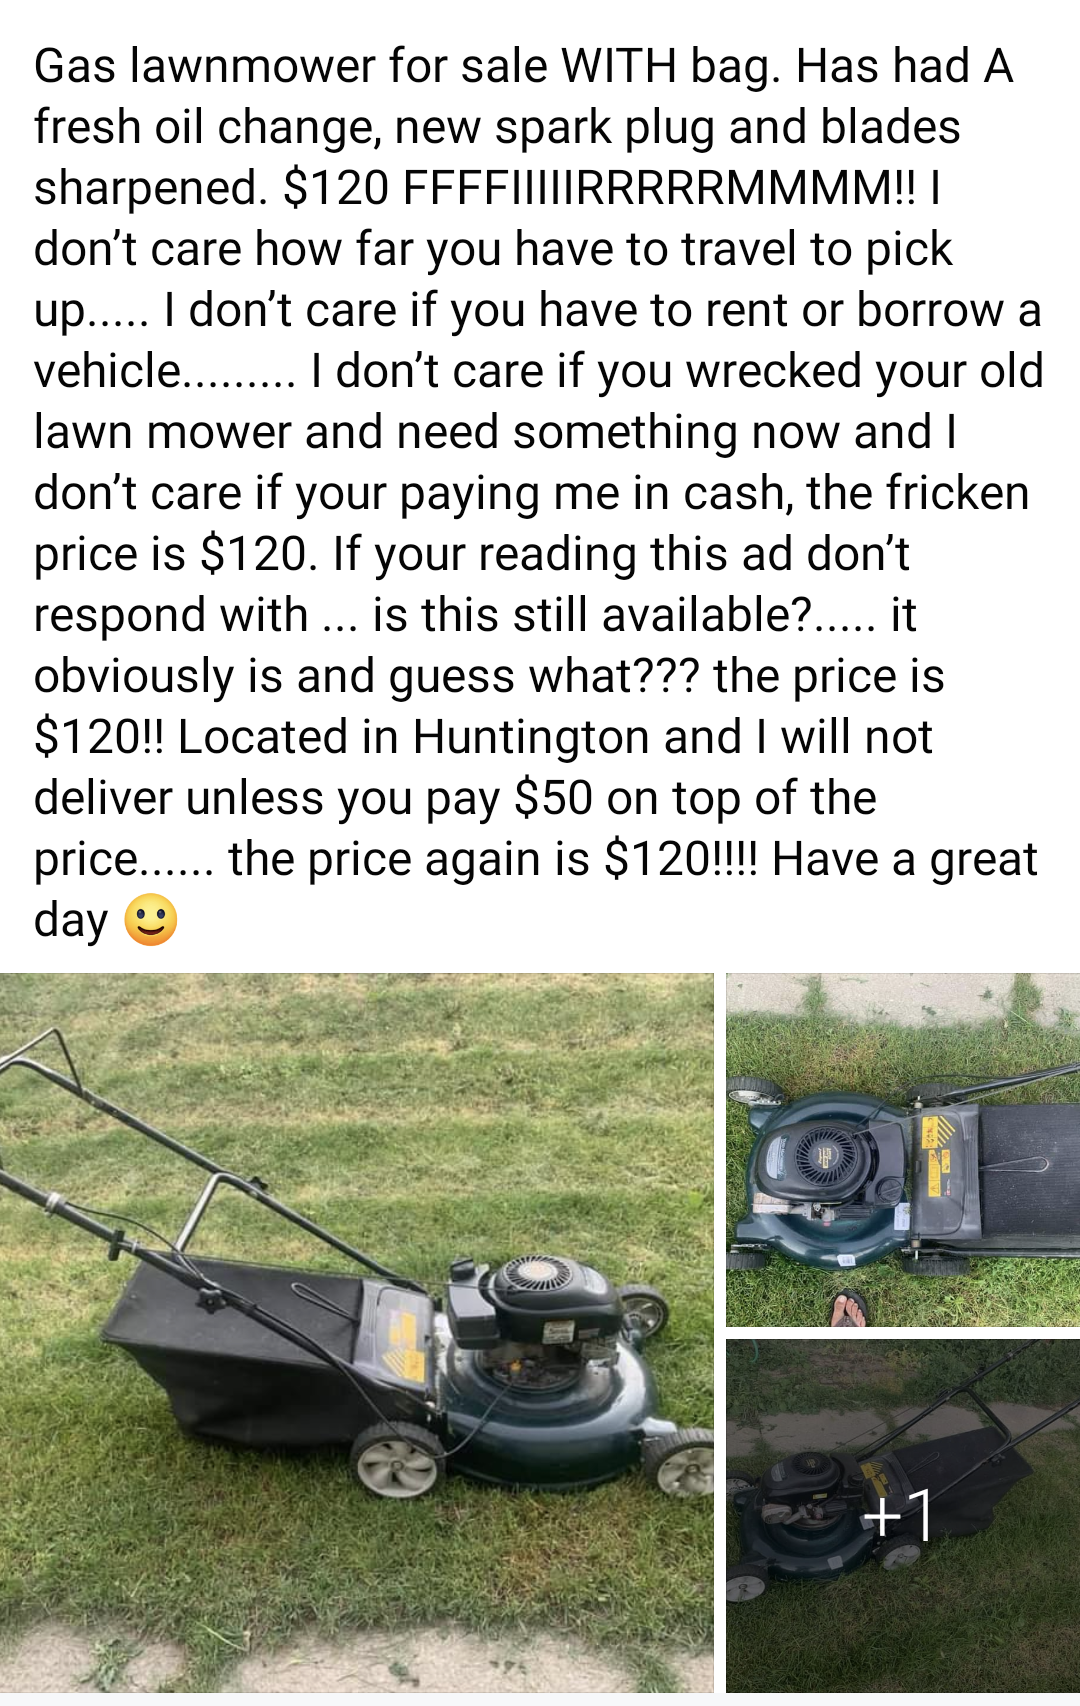 Gas lawnmower for sale With bag. Has had A fresh oil change, new spark plug and blades sharpened. $120 Ffffiirrrrrmmmm!!! don't care how far you have to travel to pick up.... I don't care if you have to rent or borrow a vehicle......... I don't ca